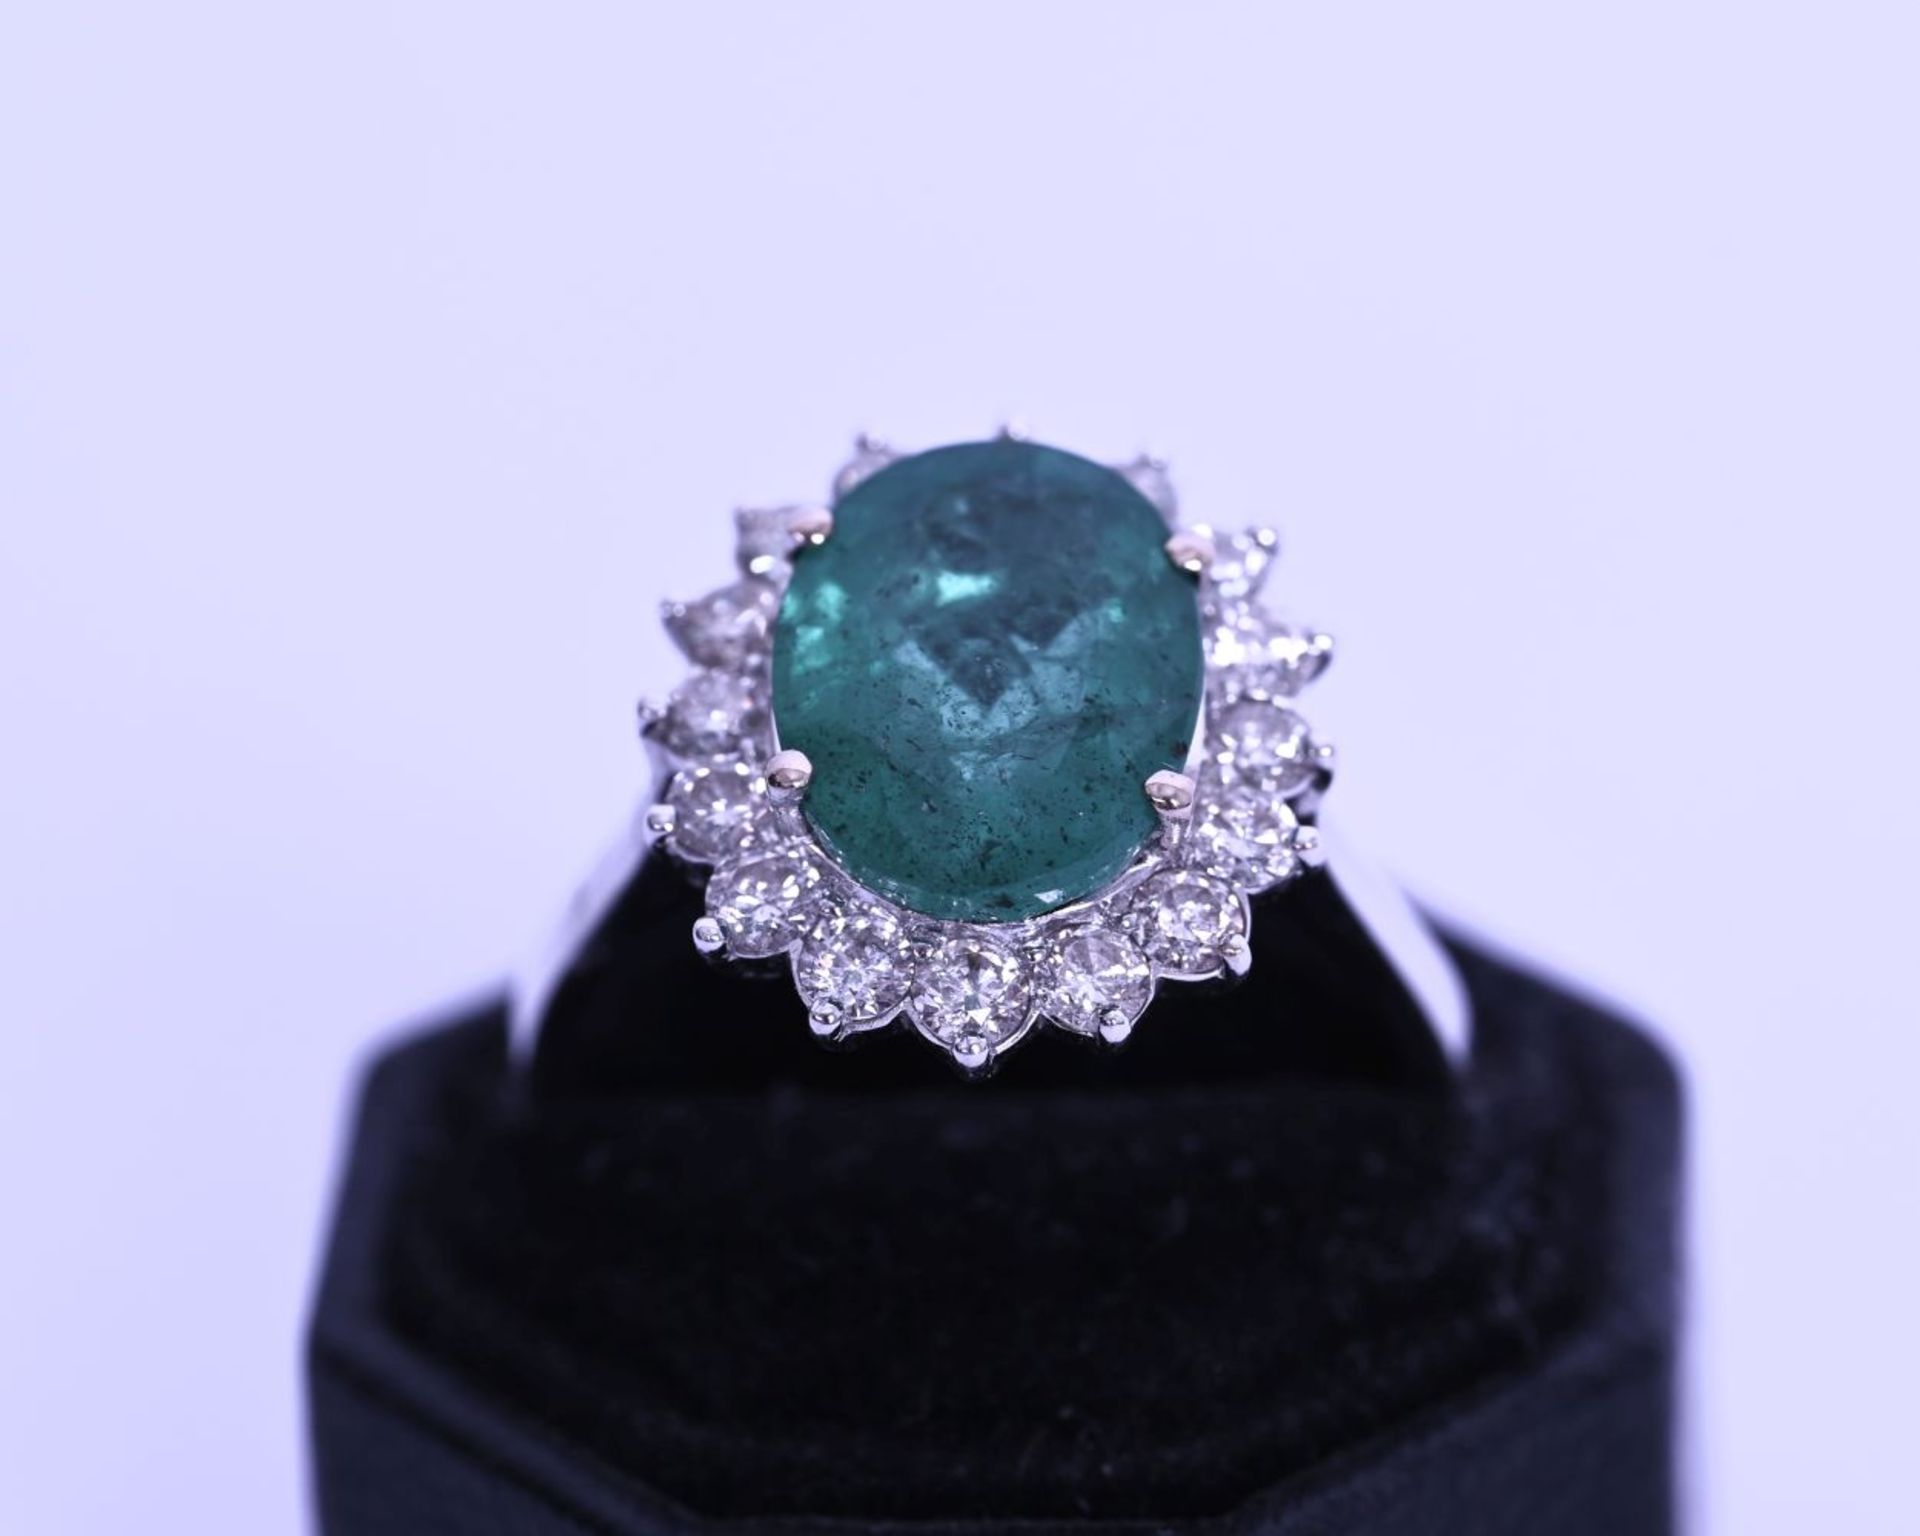 18K WHITE GOLD COLOMBIAN EMERALD & DIAMOND RING - Image 2 of 2